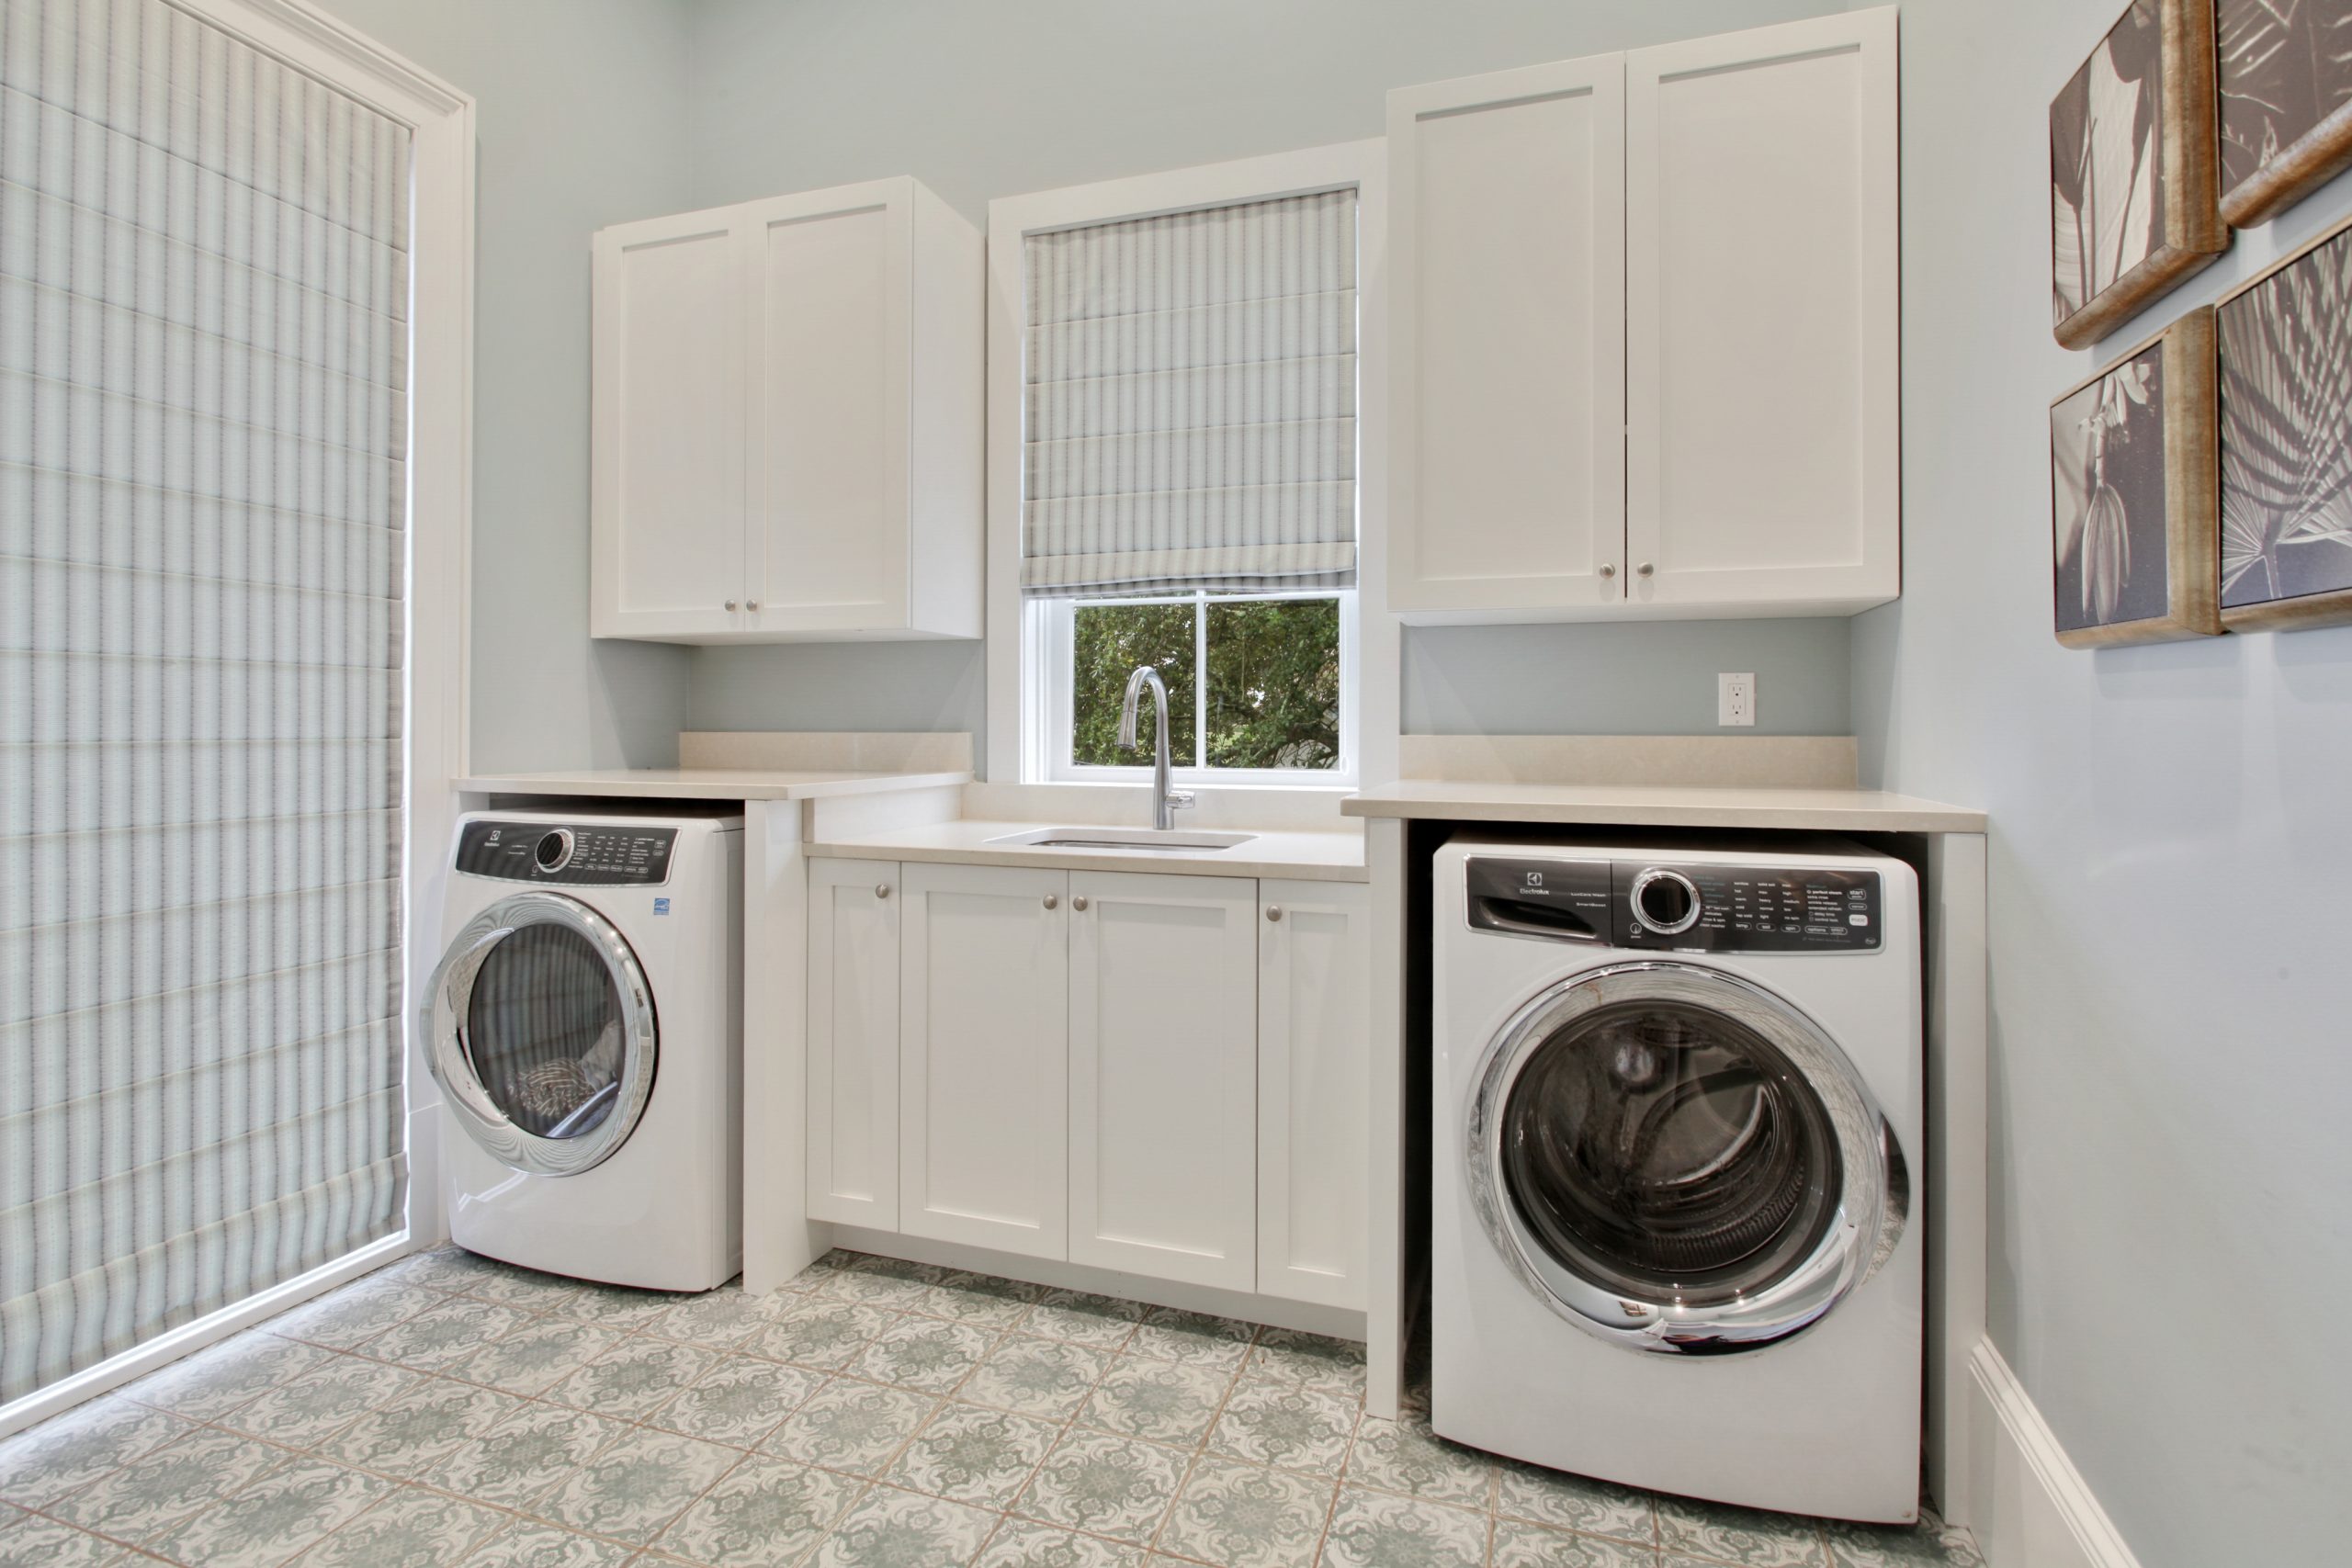 Laundry Room of Audubon House luxury new construction custom home designed and built by DMG